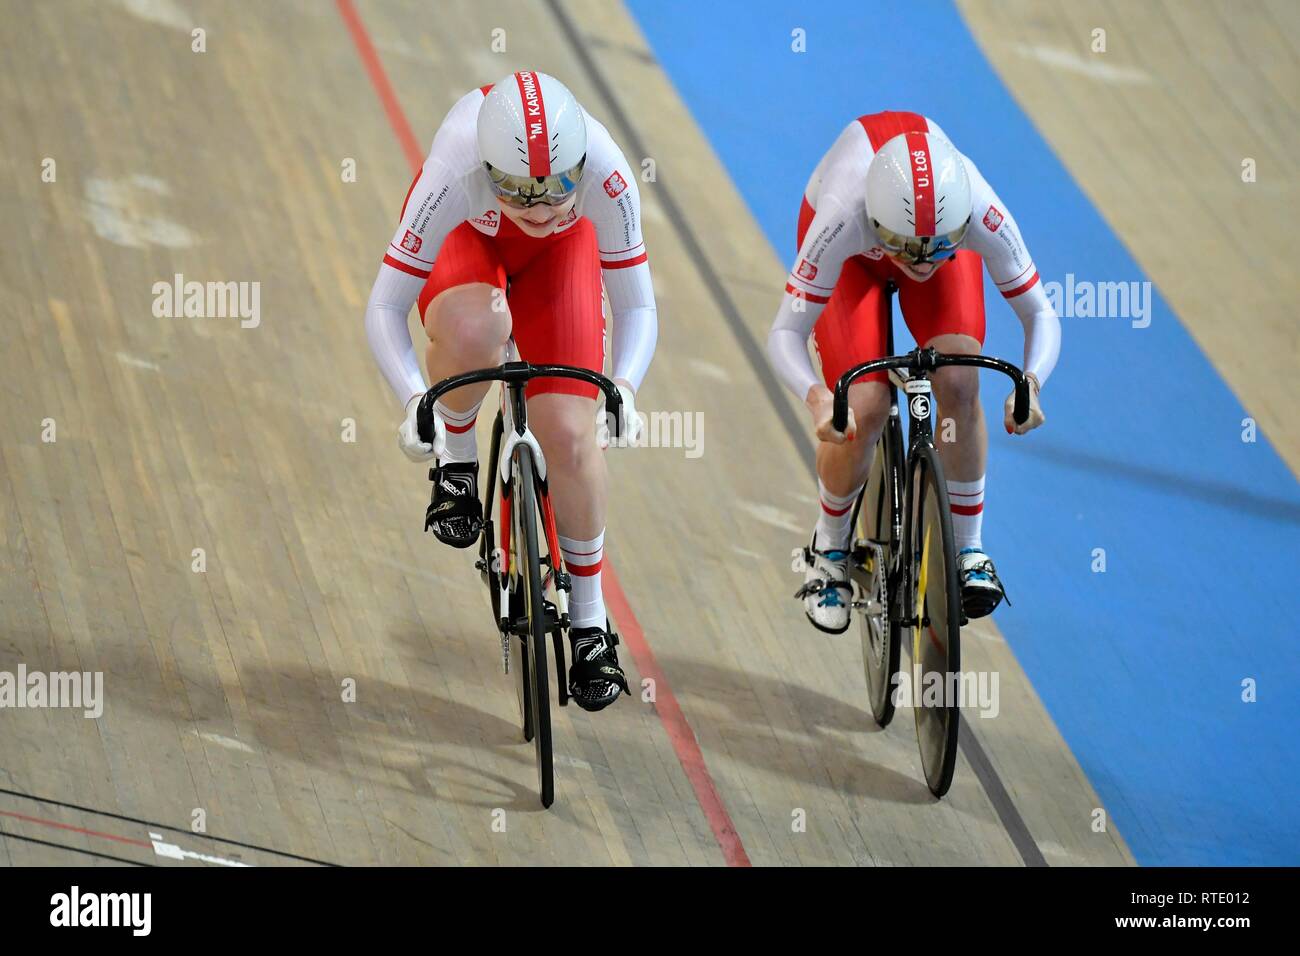 Track Cycling World Championships 2019 UCI on February 27 2019 at BGZ Arena in Pruszk, Poland. Marlena Karwacka and Urszula Los POL during the Womens Teamsprint Credit: Sander Chamid/SCS/AFLO/Alamy Live News Stock Photo